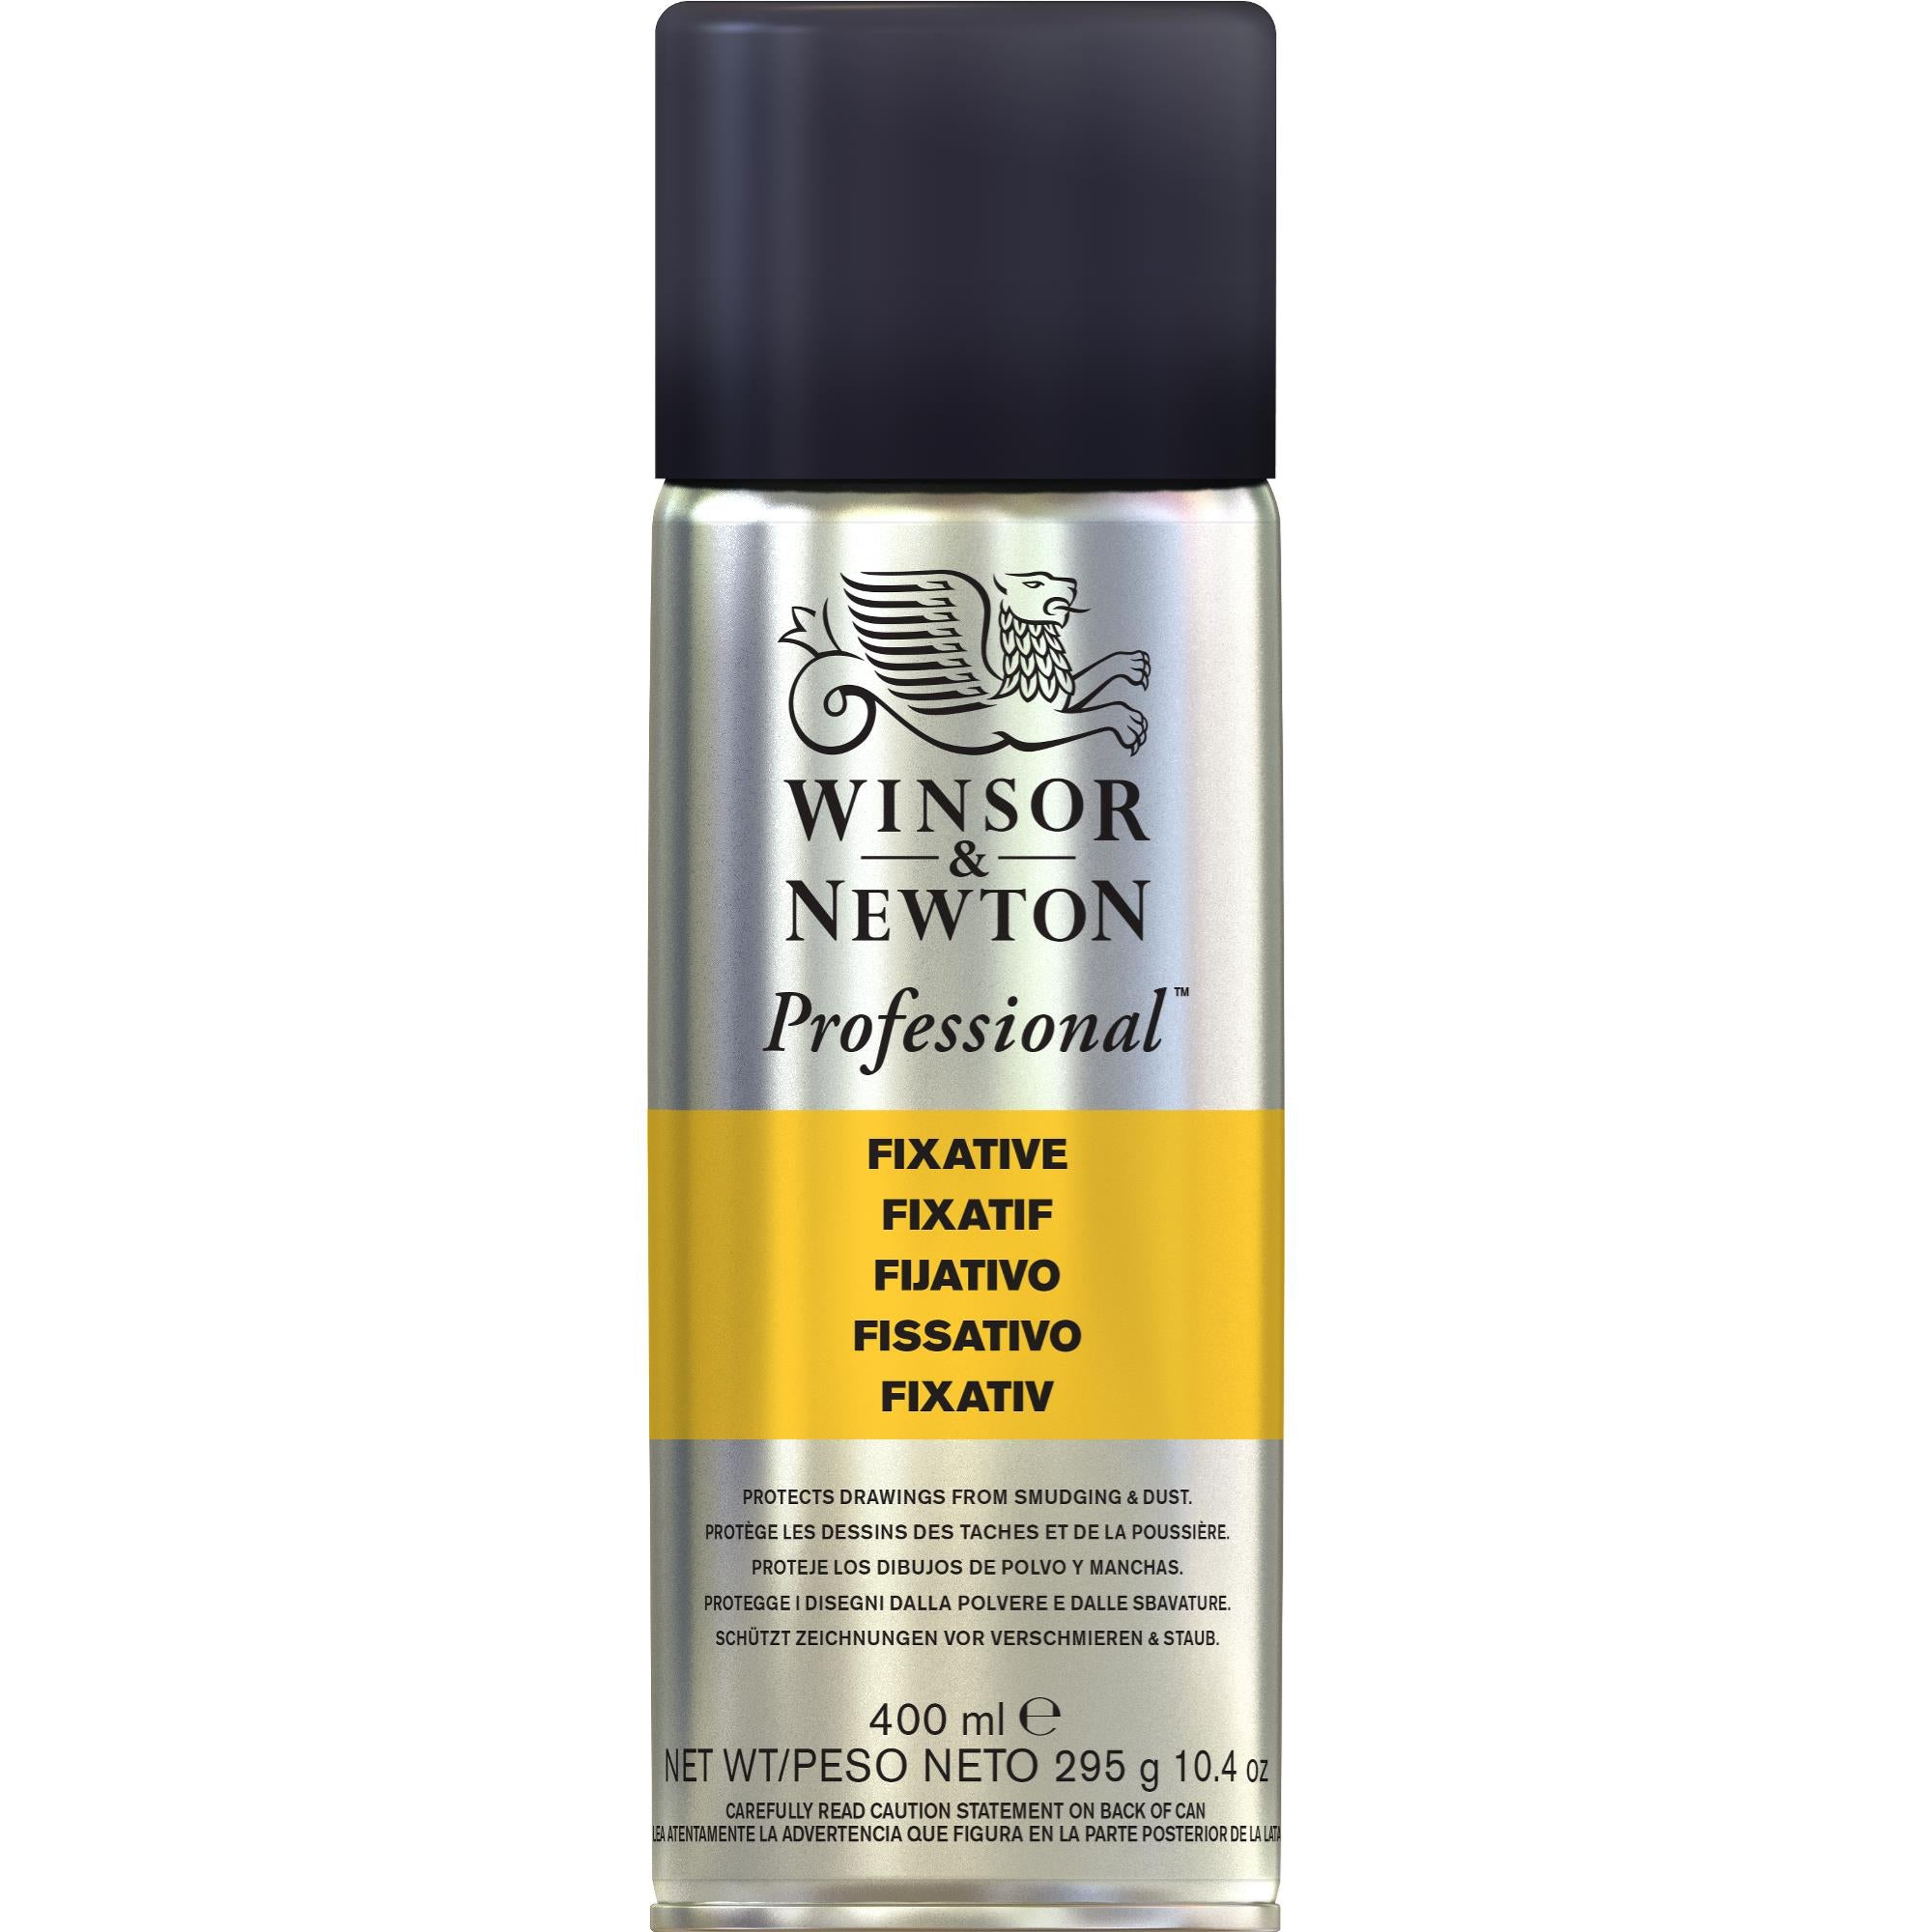 Winsor & Newton Professional Fixative is perfect protection for your charcoal, pencil, pastel and chalk drawings.